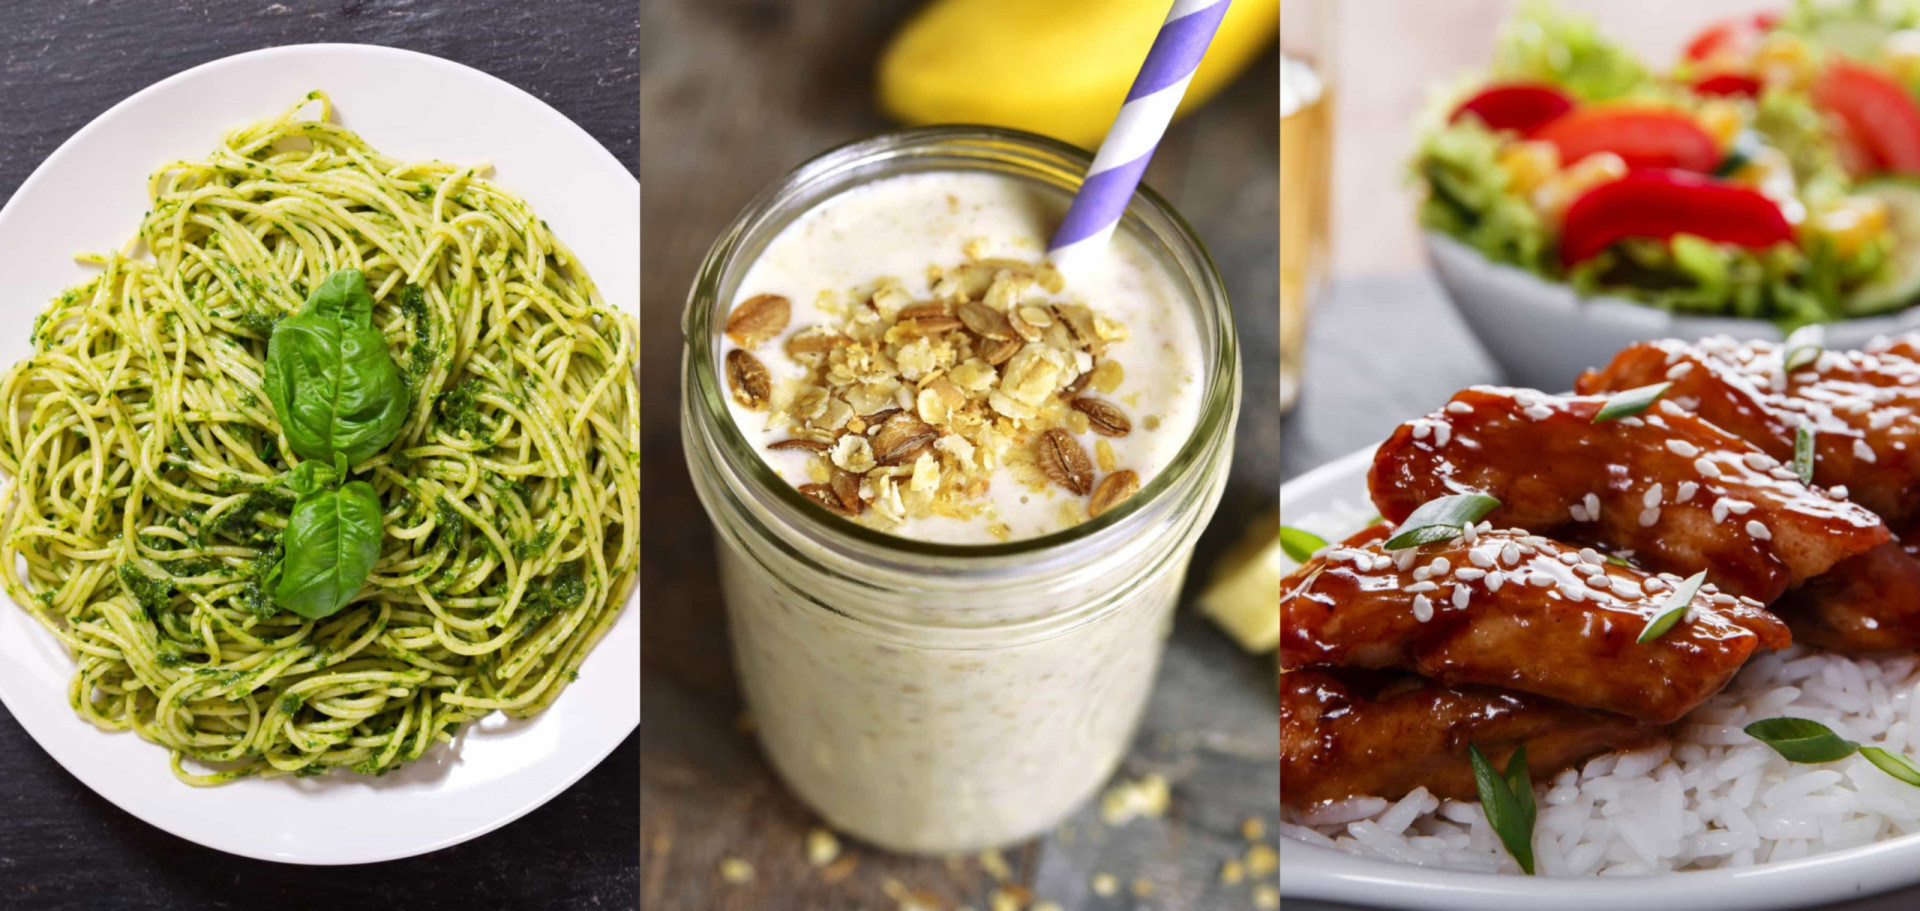 Effortless eats: simple and delicious 3-ingredient recipes